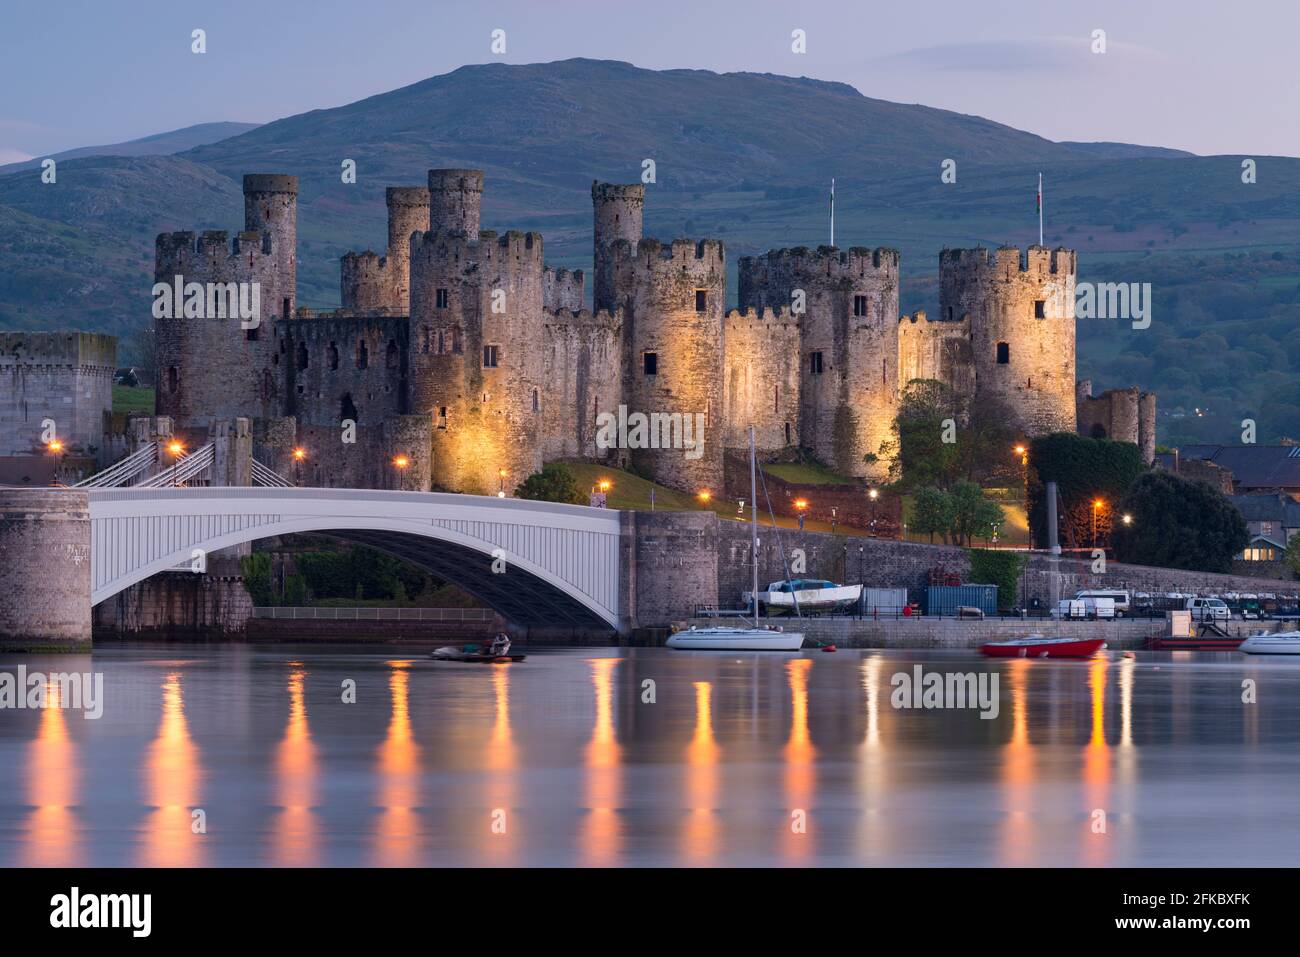 Majestic ruins of Conwy Castle in evening light, UNESCO World Heritage Site, Clwyd, Wales, United Kingdom, Europe Stock Photo